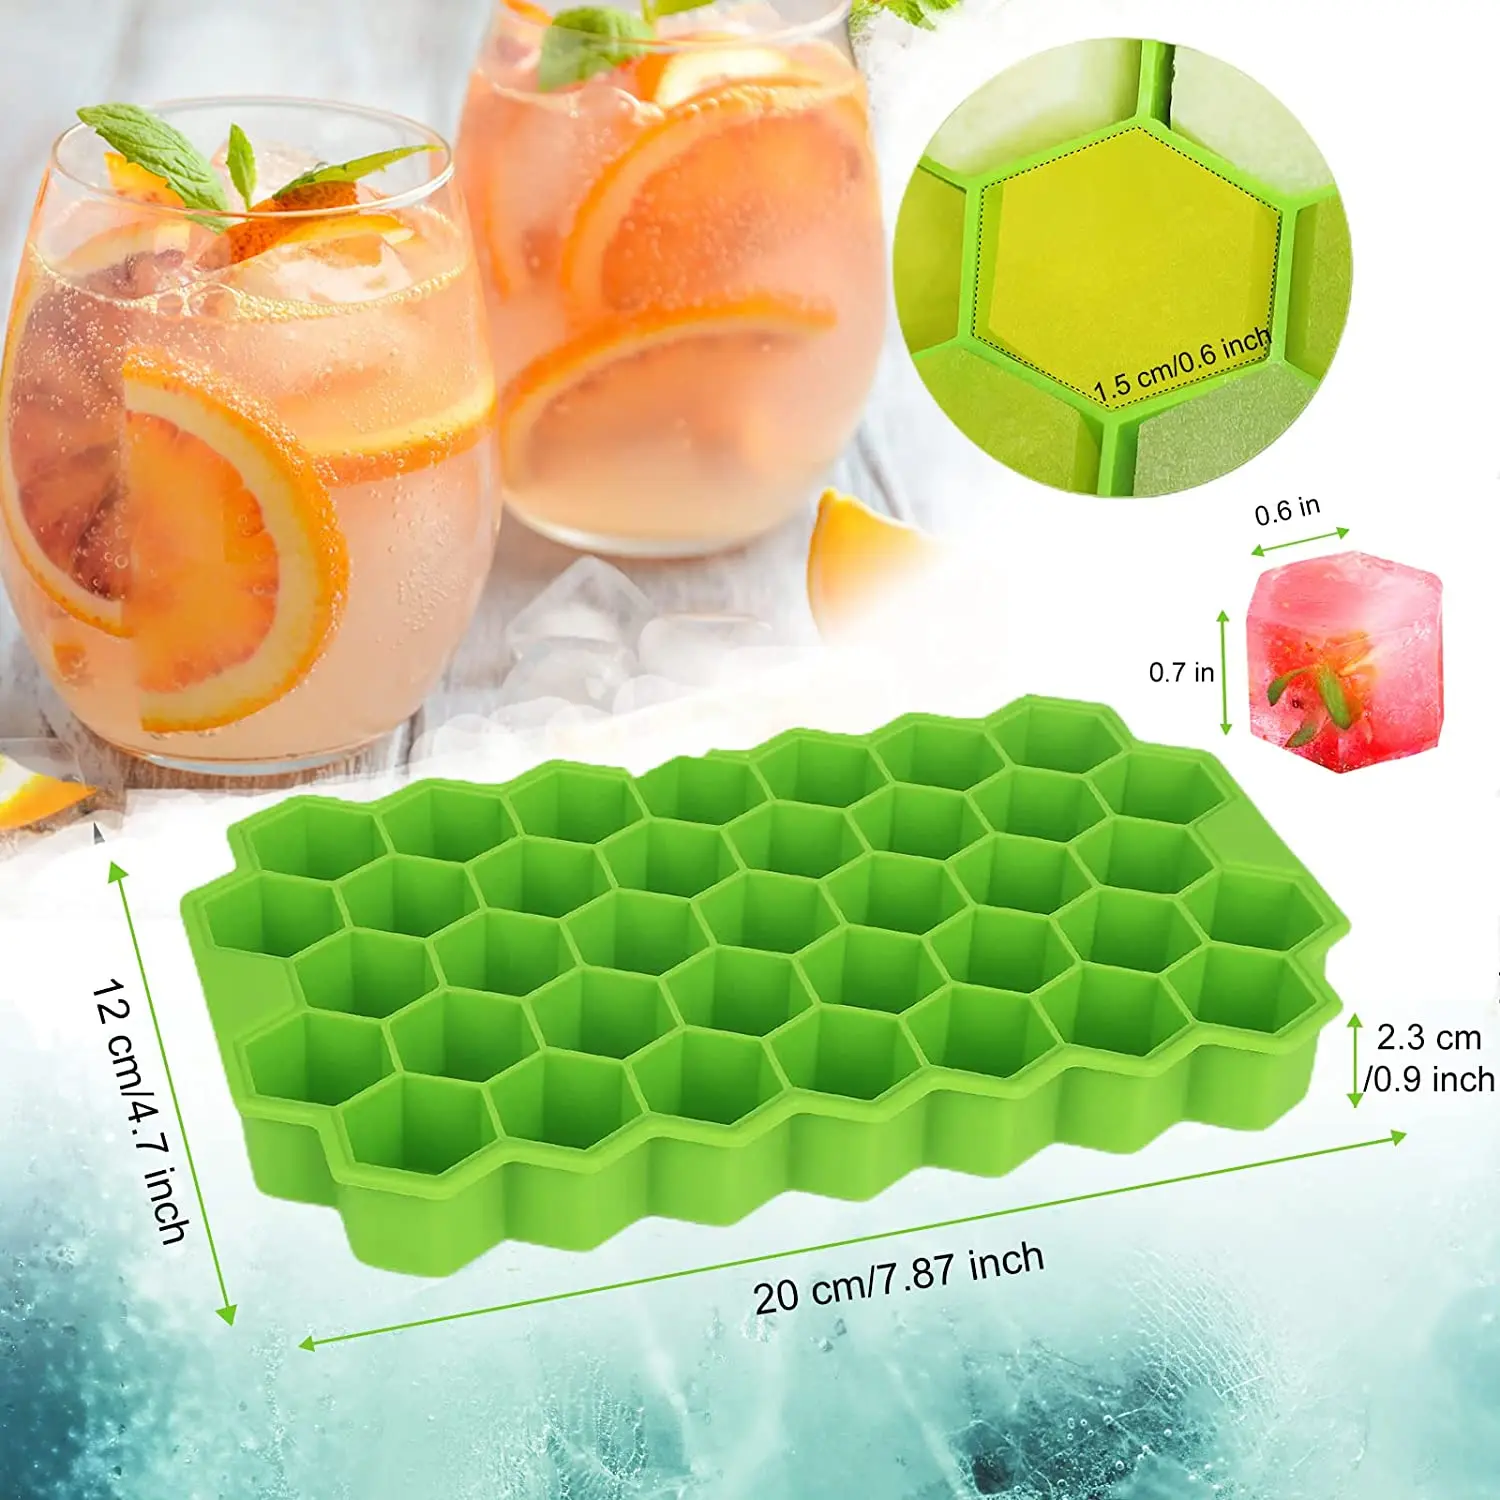 https://ae01.alicdn.com/kf/S21804507a10849e188c7a819c52f802eX/37-Cavity-Honeycomb-Ice-Cube-Trays-Reusable-Silicone-Ice-Cube-Mold-BPA-Free-Ice-Maker-with.jpg